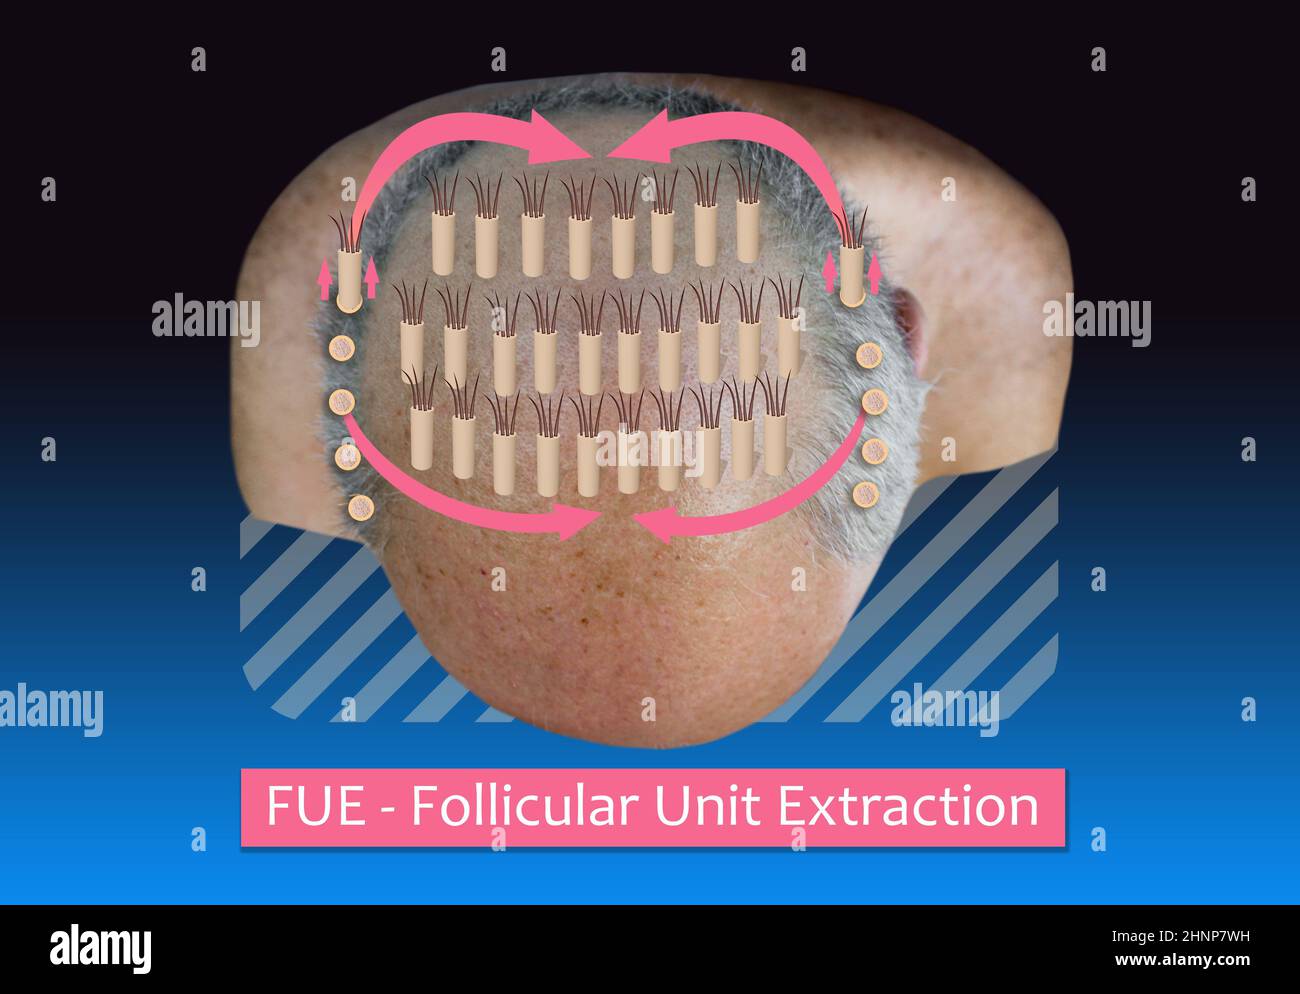 Methods of hair transplantation fut vs fue with infographic elements of illustration. Stock Photo